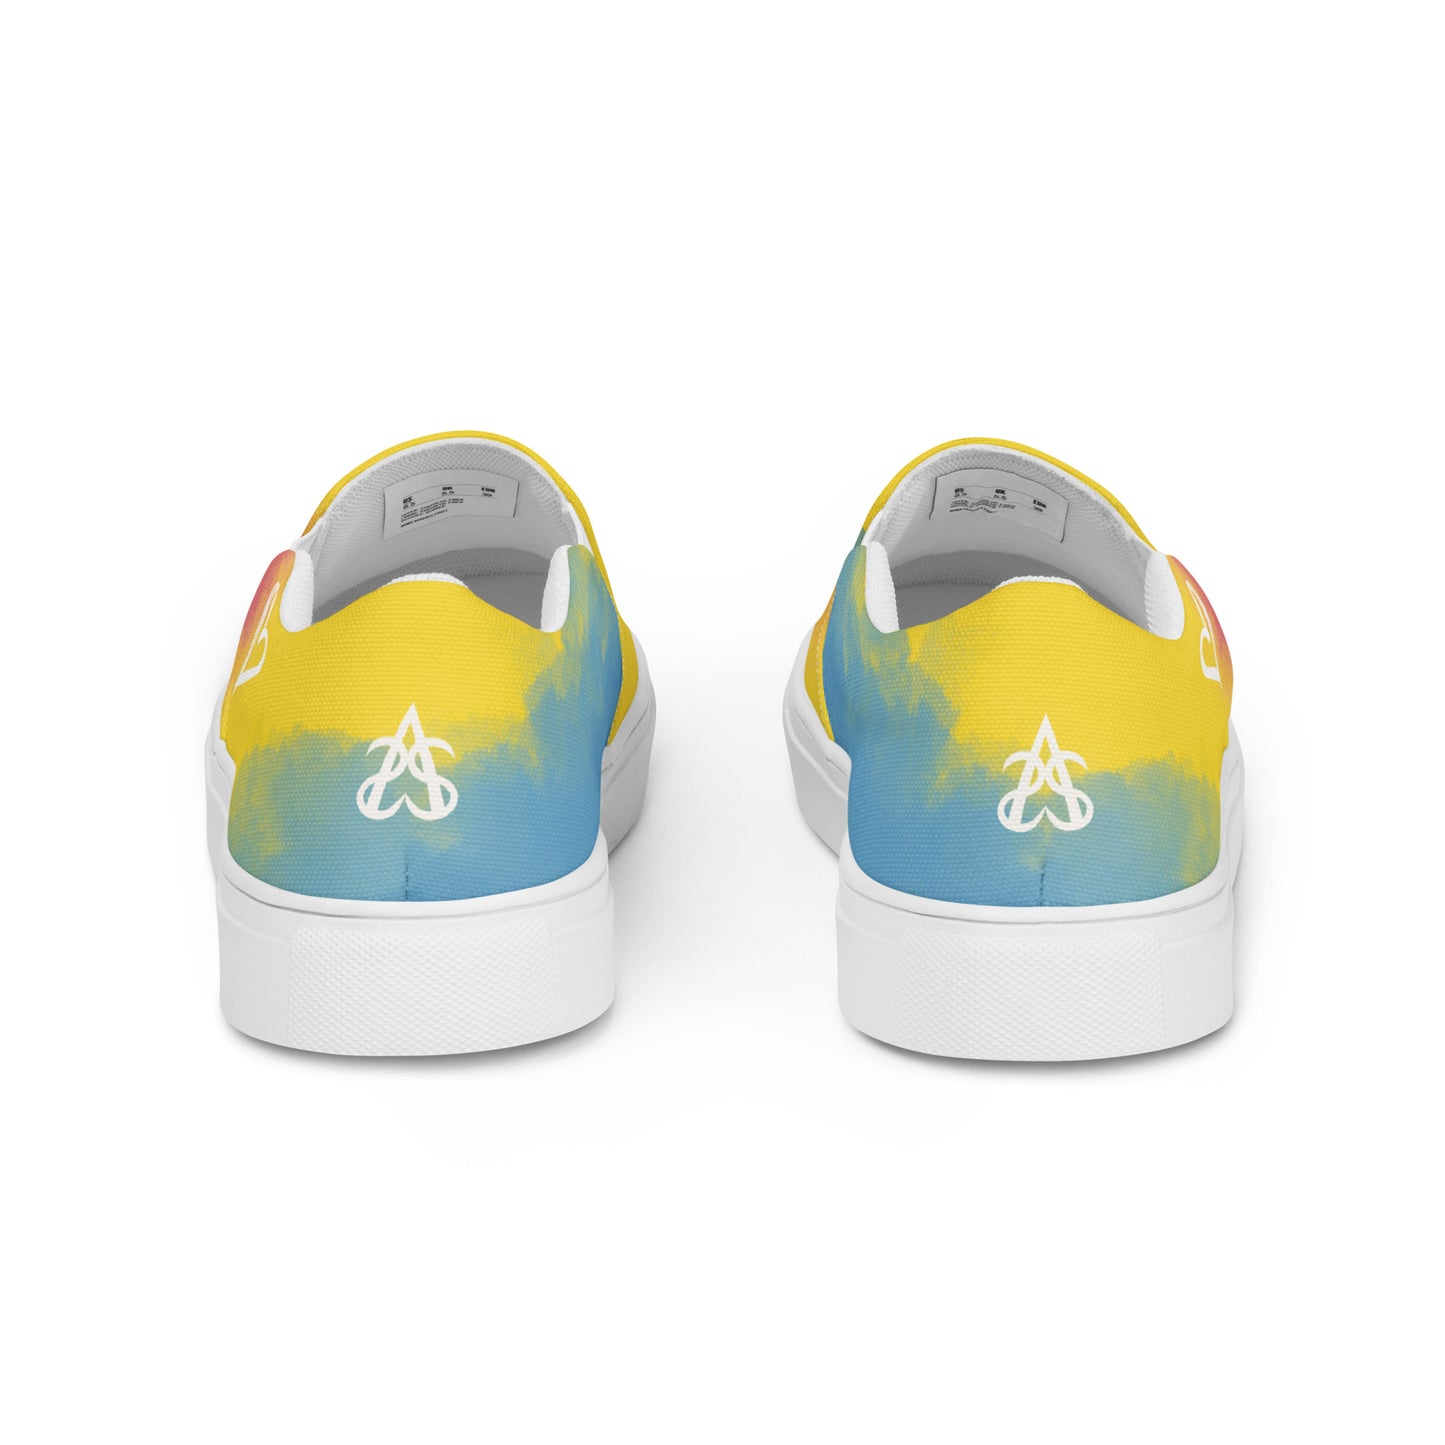 Back view: A pair of slip on shoes with color block pink, yellow, and blue clouds, a white hand drawn heart, and the Aras Sivad logo on the back.